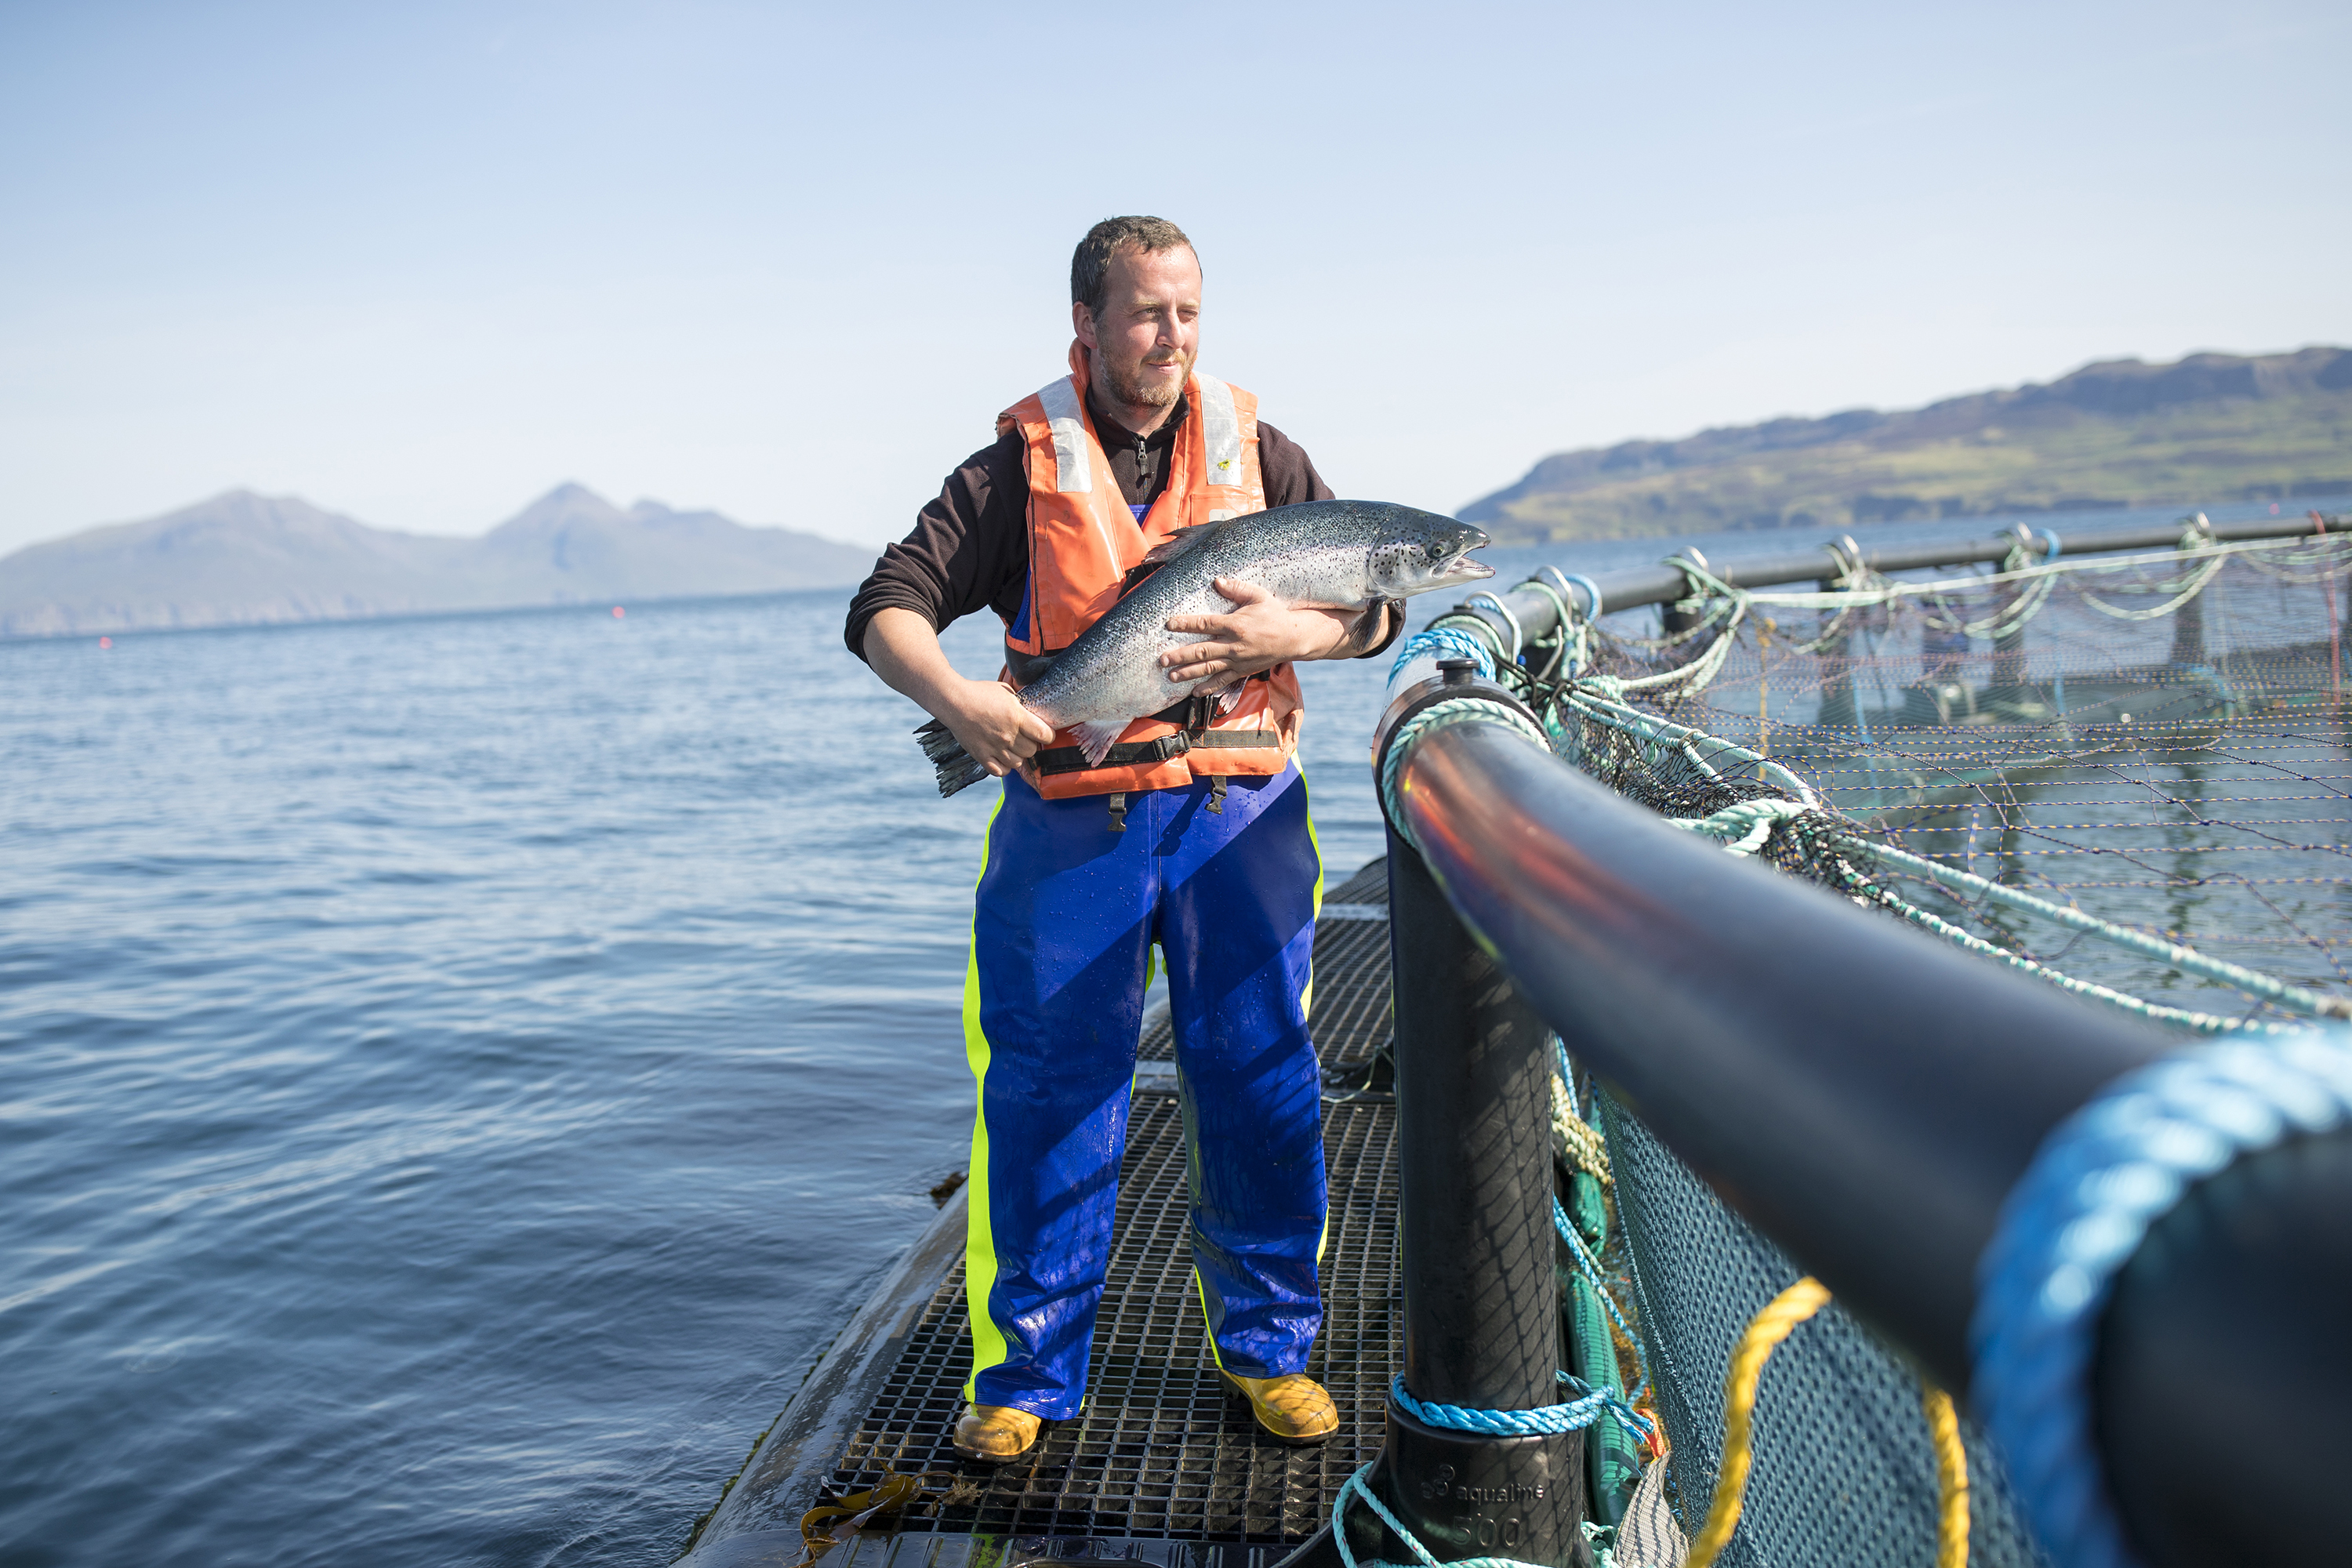 Fish farm manager Robert Wyvill, 34, originally from North Uist who has worked in fish farms since 1996 and on Muck since July 2014 at Marine Harvest's salmon farm on the Isle of Muck, Scotland.